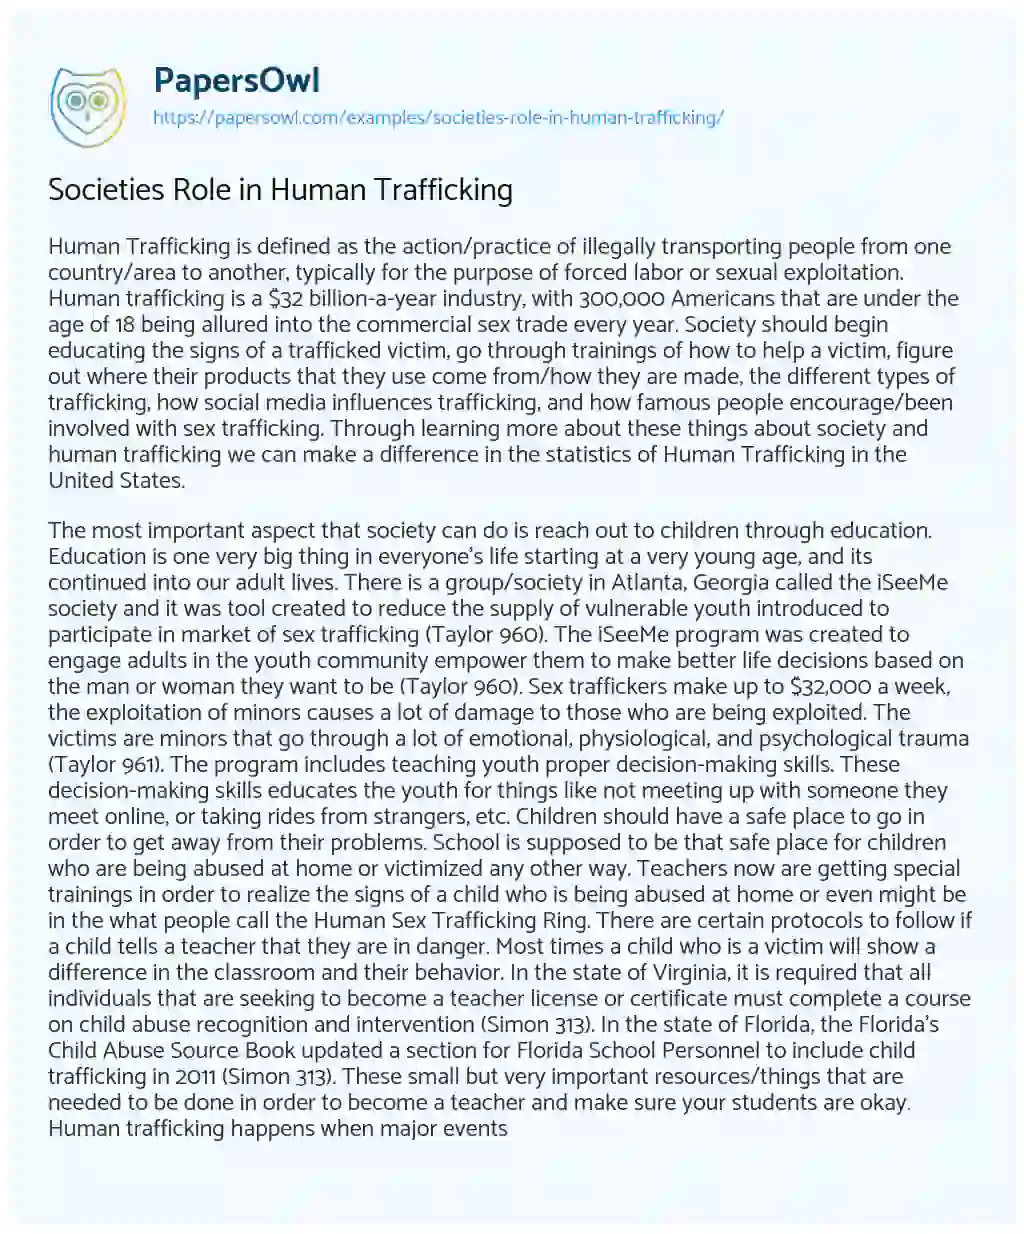 Essay on Societies Role in Human Trafficking